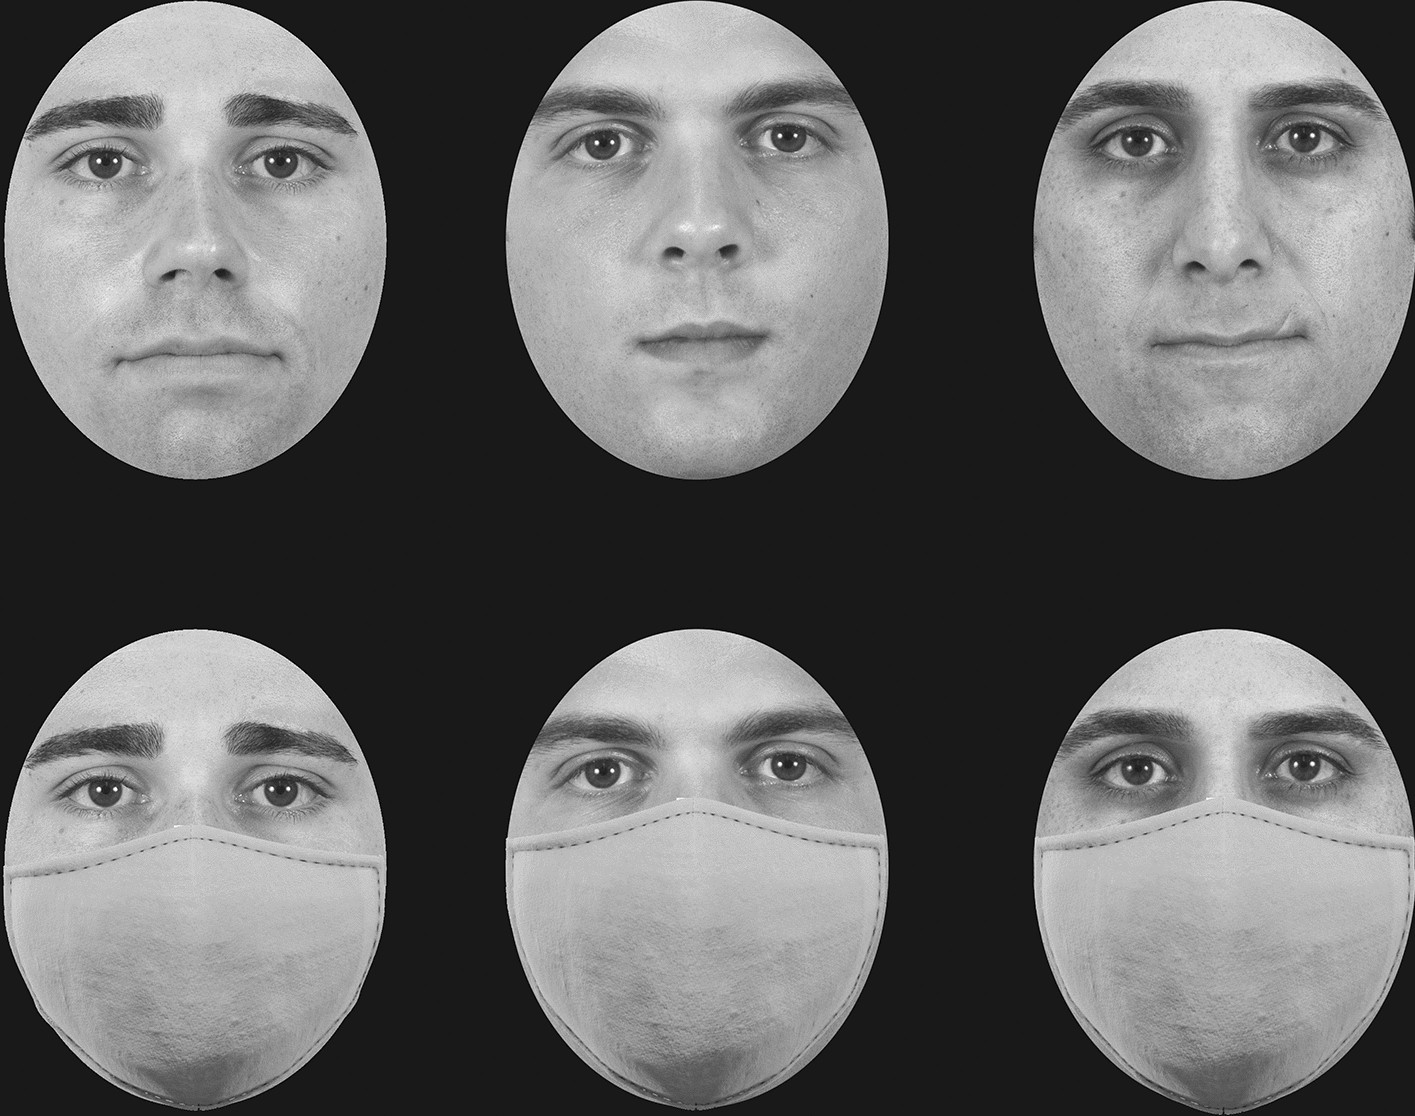 The masks the way people perceive faces | Scientific Reports